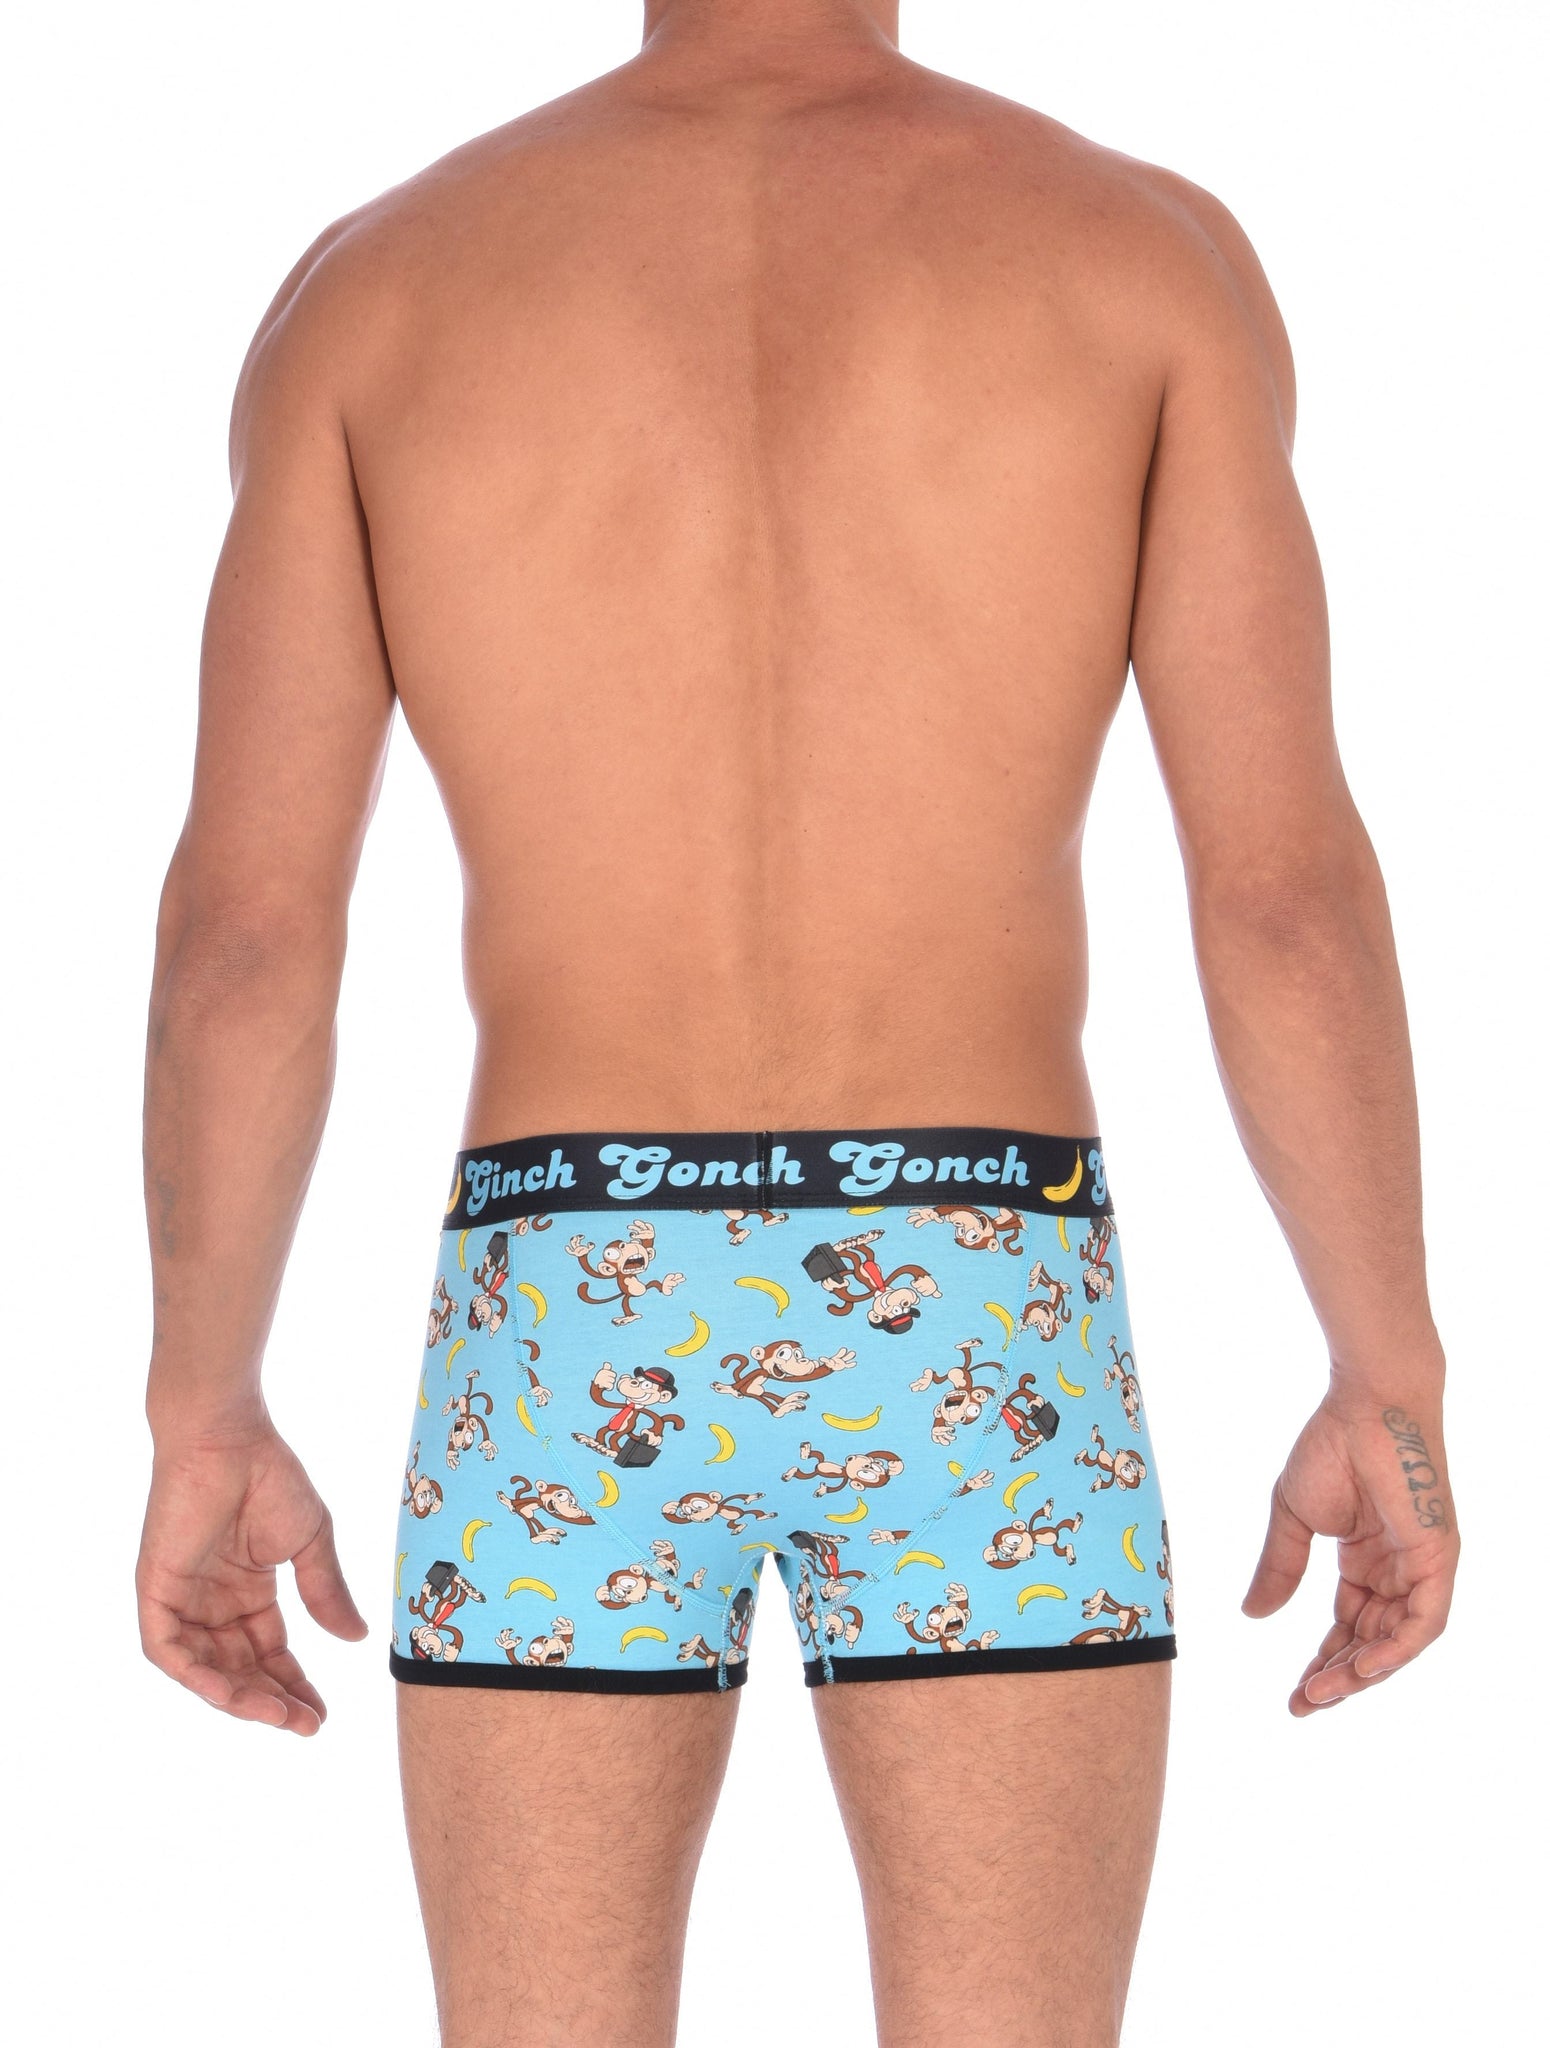 Ginch Gonch Monkey Business Men's Underwear Boxer Brief, Trunk, with blue background, monkeys, and bananas. Black trim and printed waistband with Ginch Gonch and bananas. Back